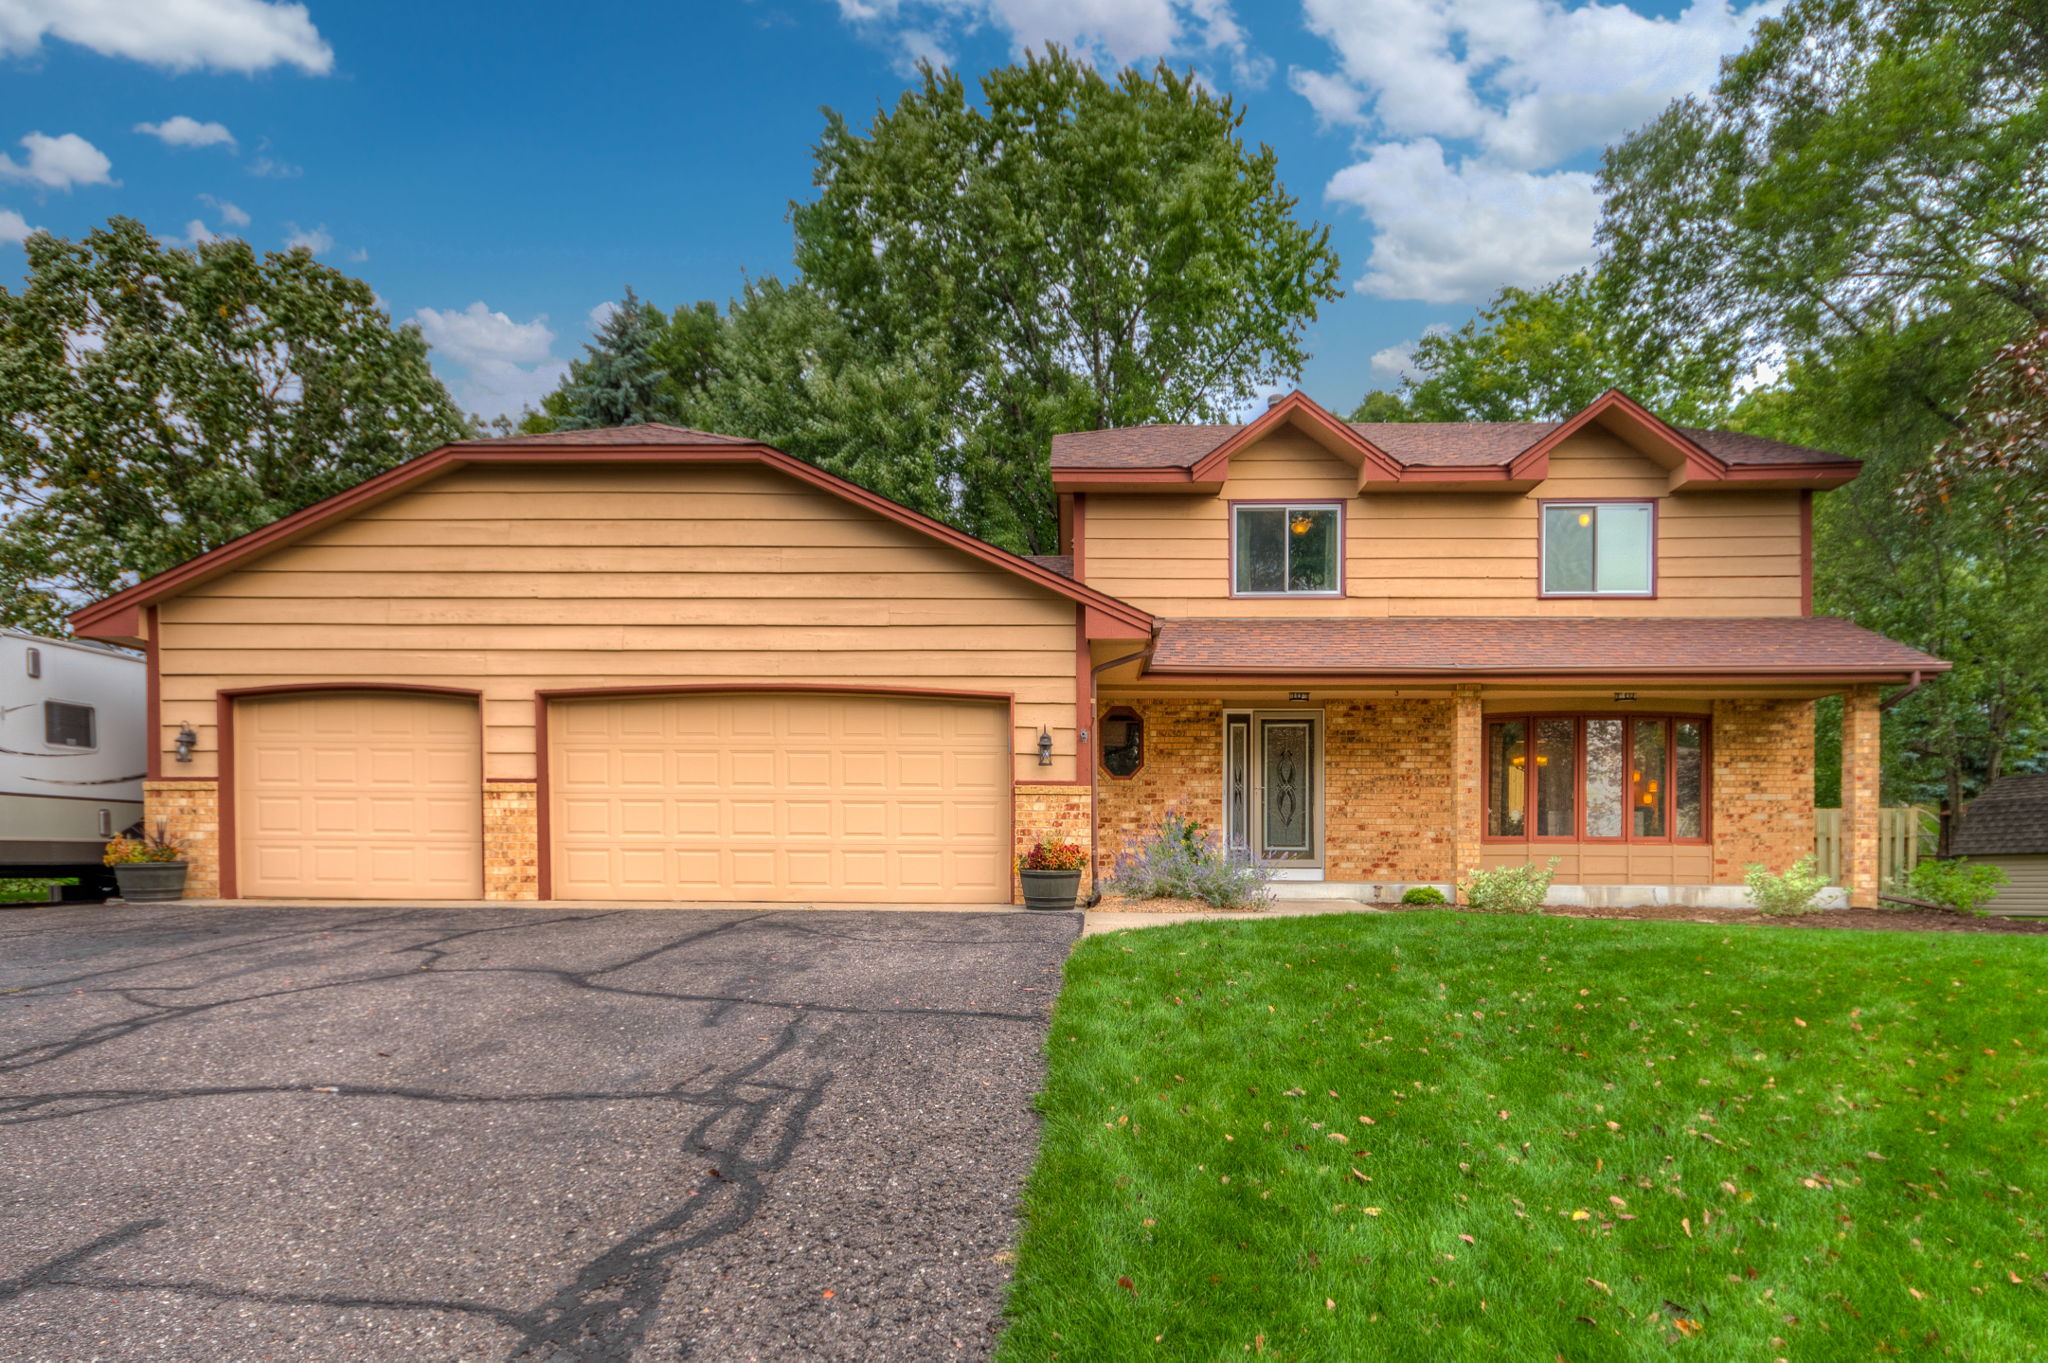  2021 127th Ave NW, Coon Rapids, MN 55448, US